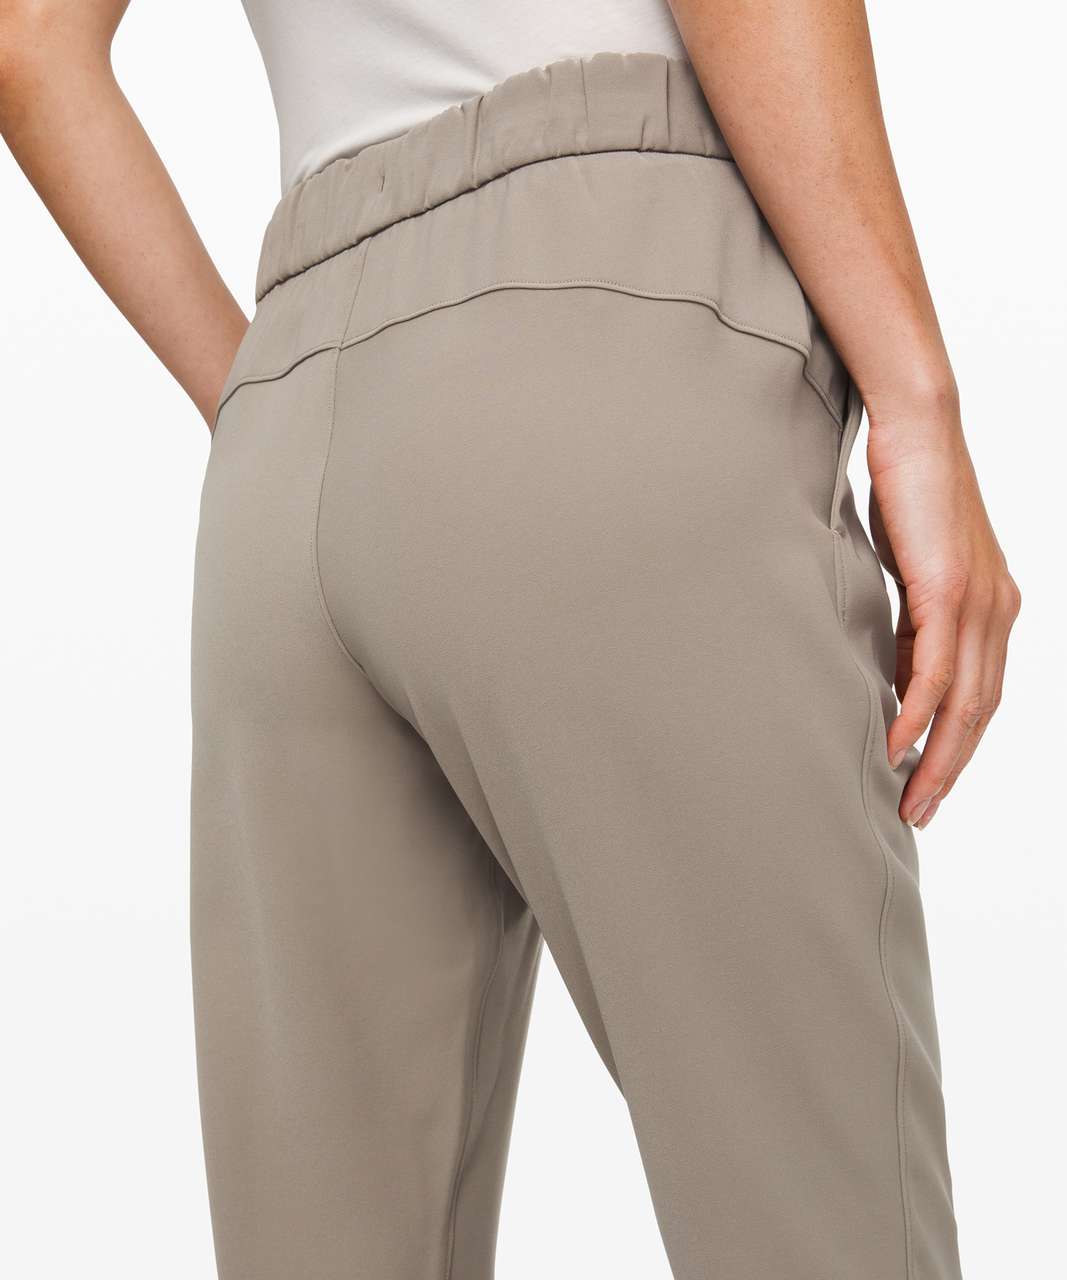 Lululemon On the Fly 7/8 Pant *Woven - Carbon Dust